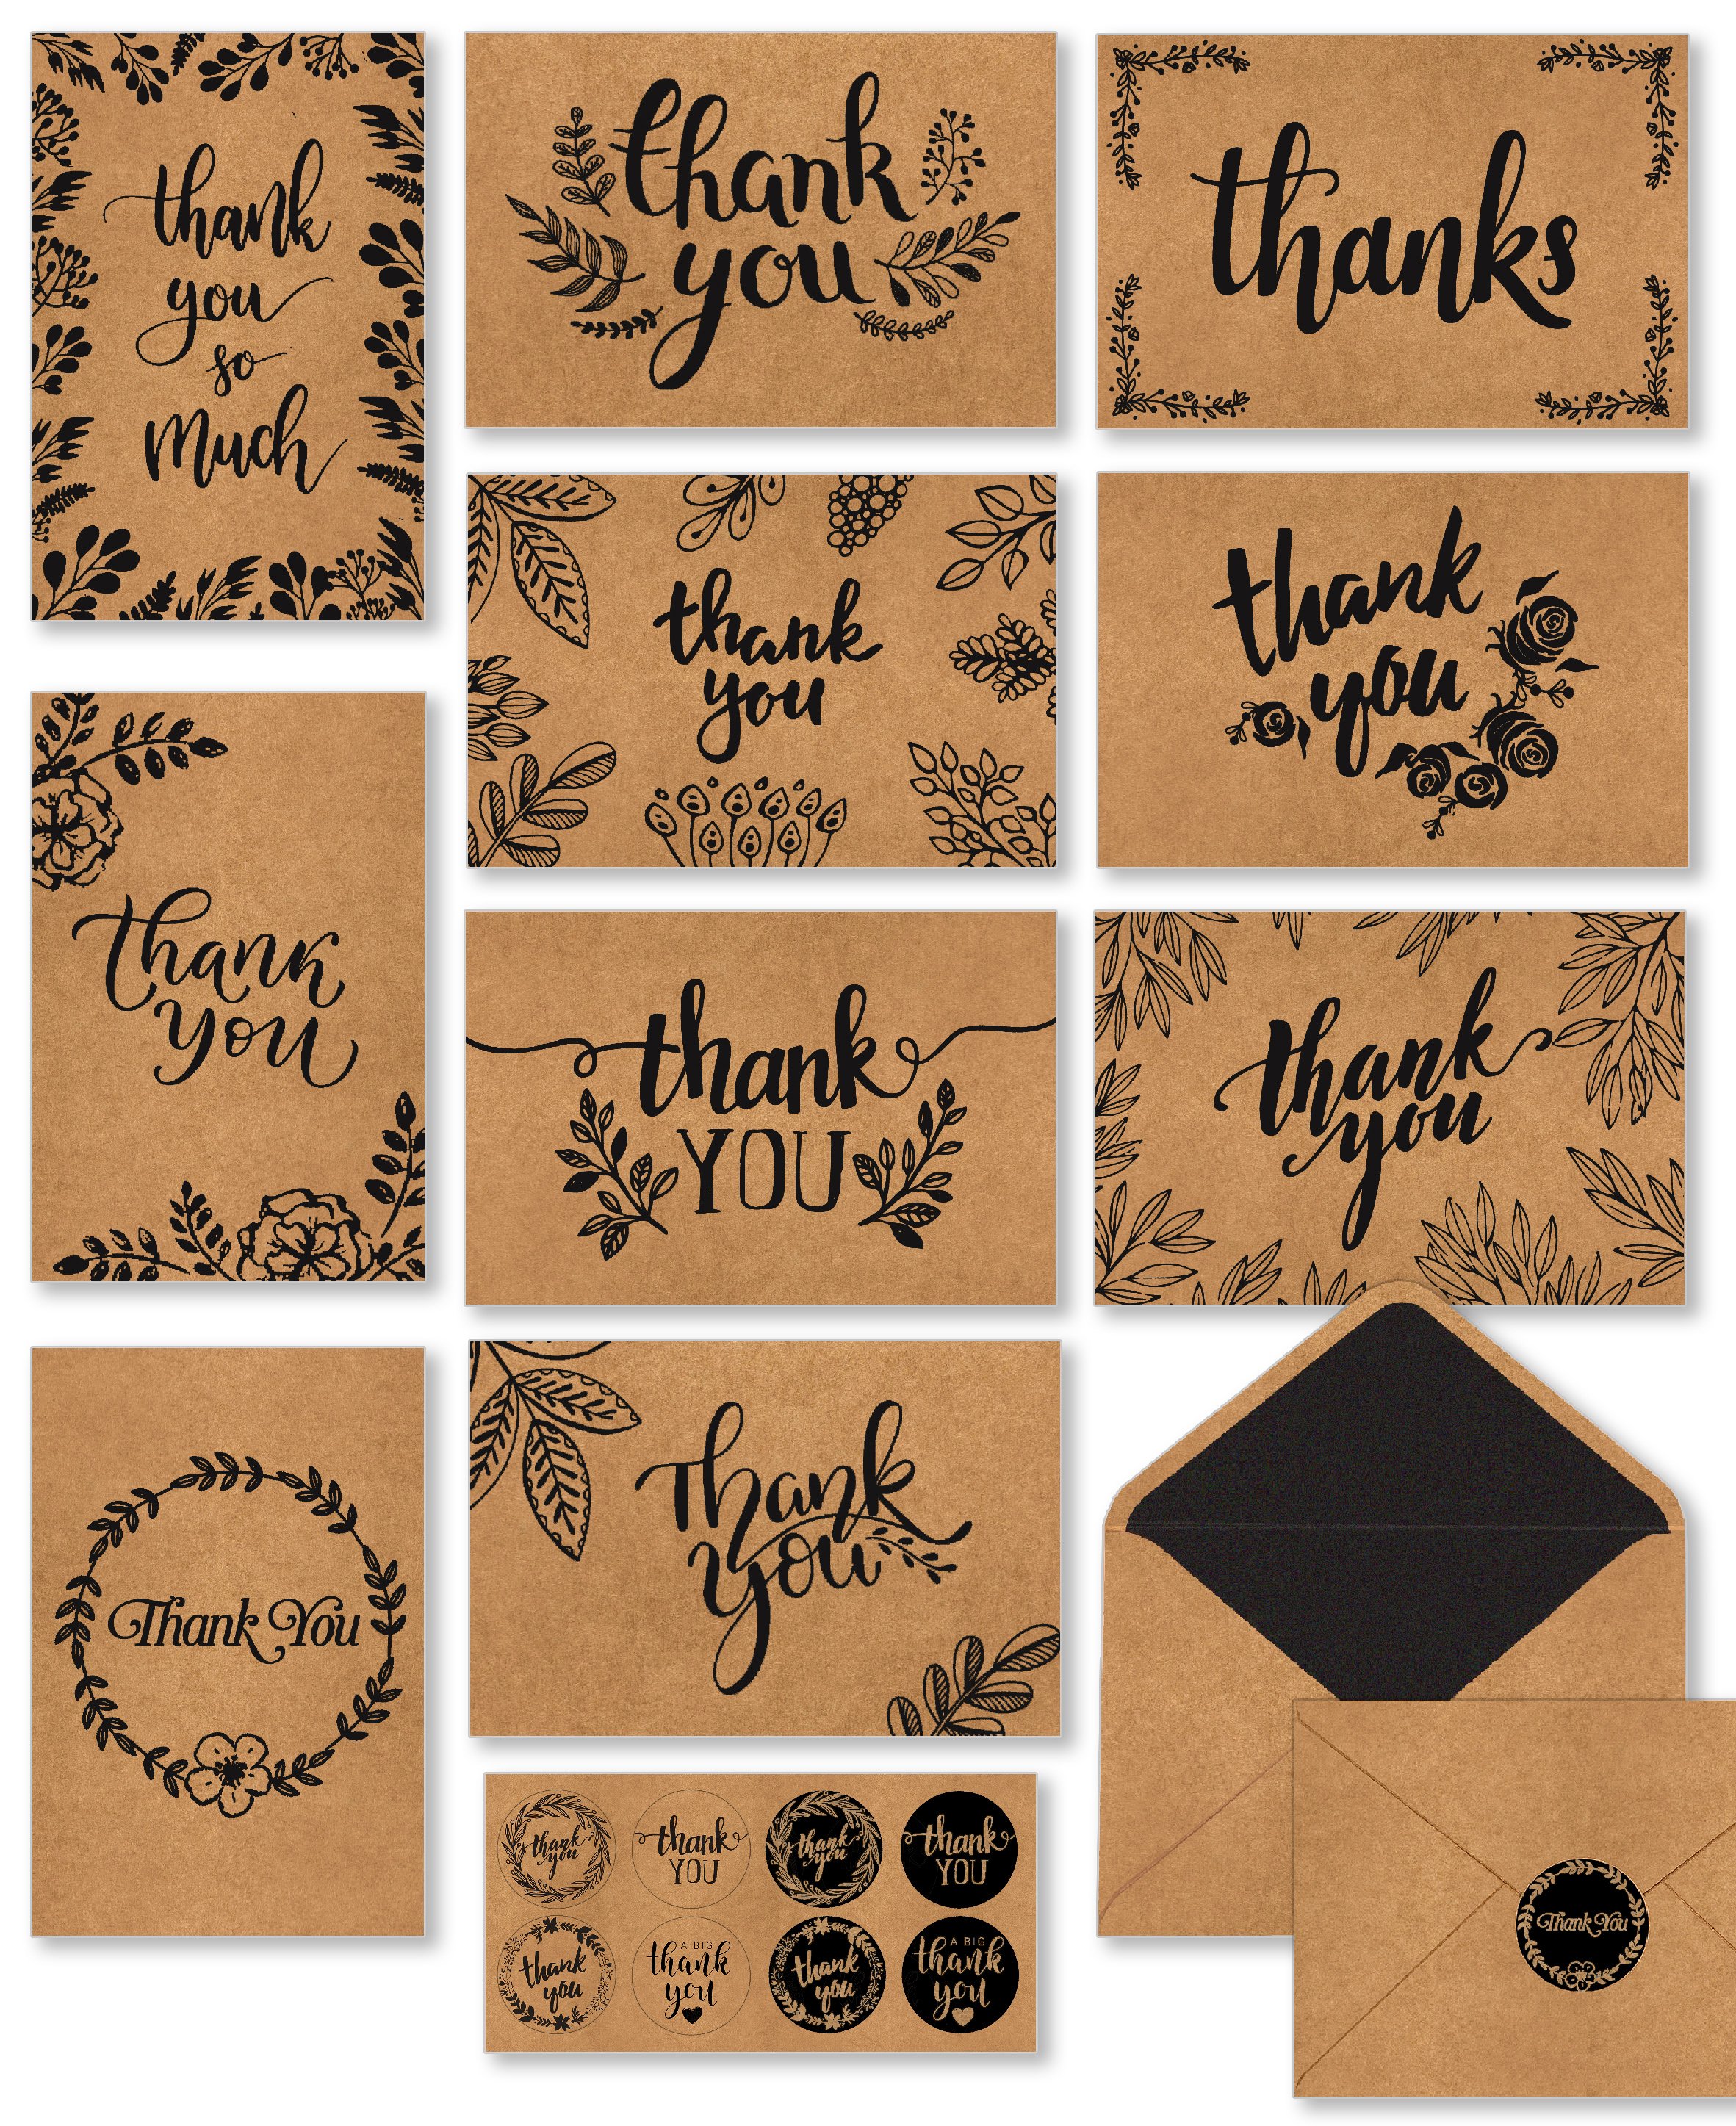 150 Thank You Cards with Brown Kraft Envelopes and Stickers